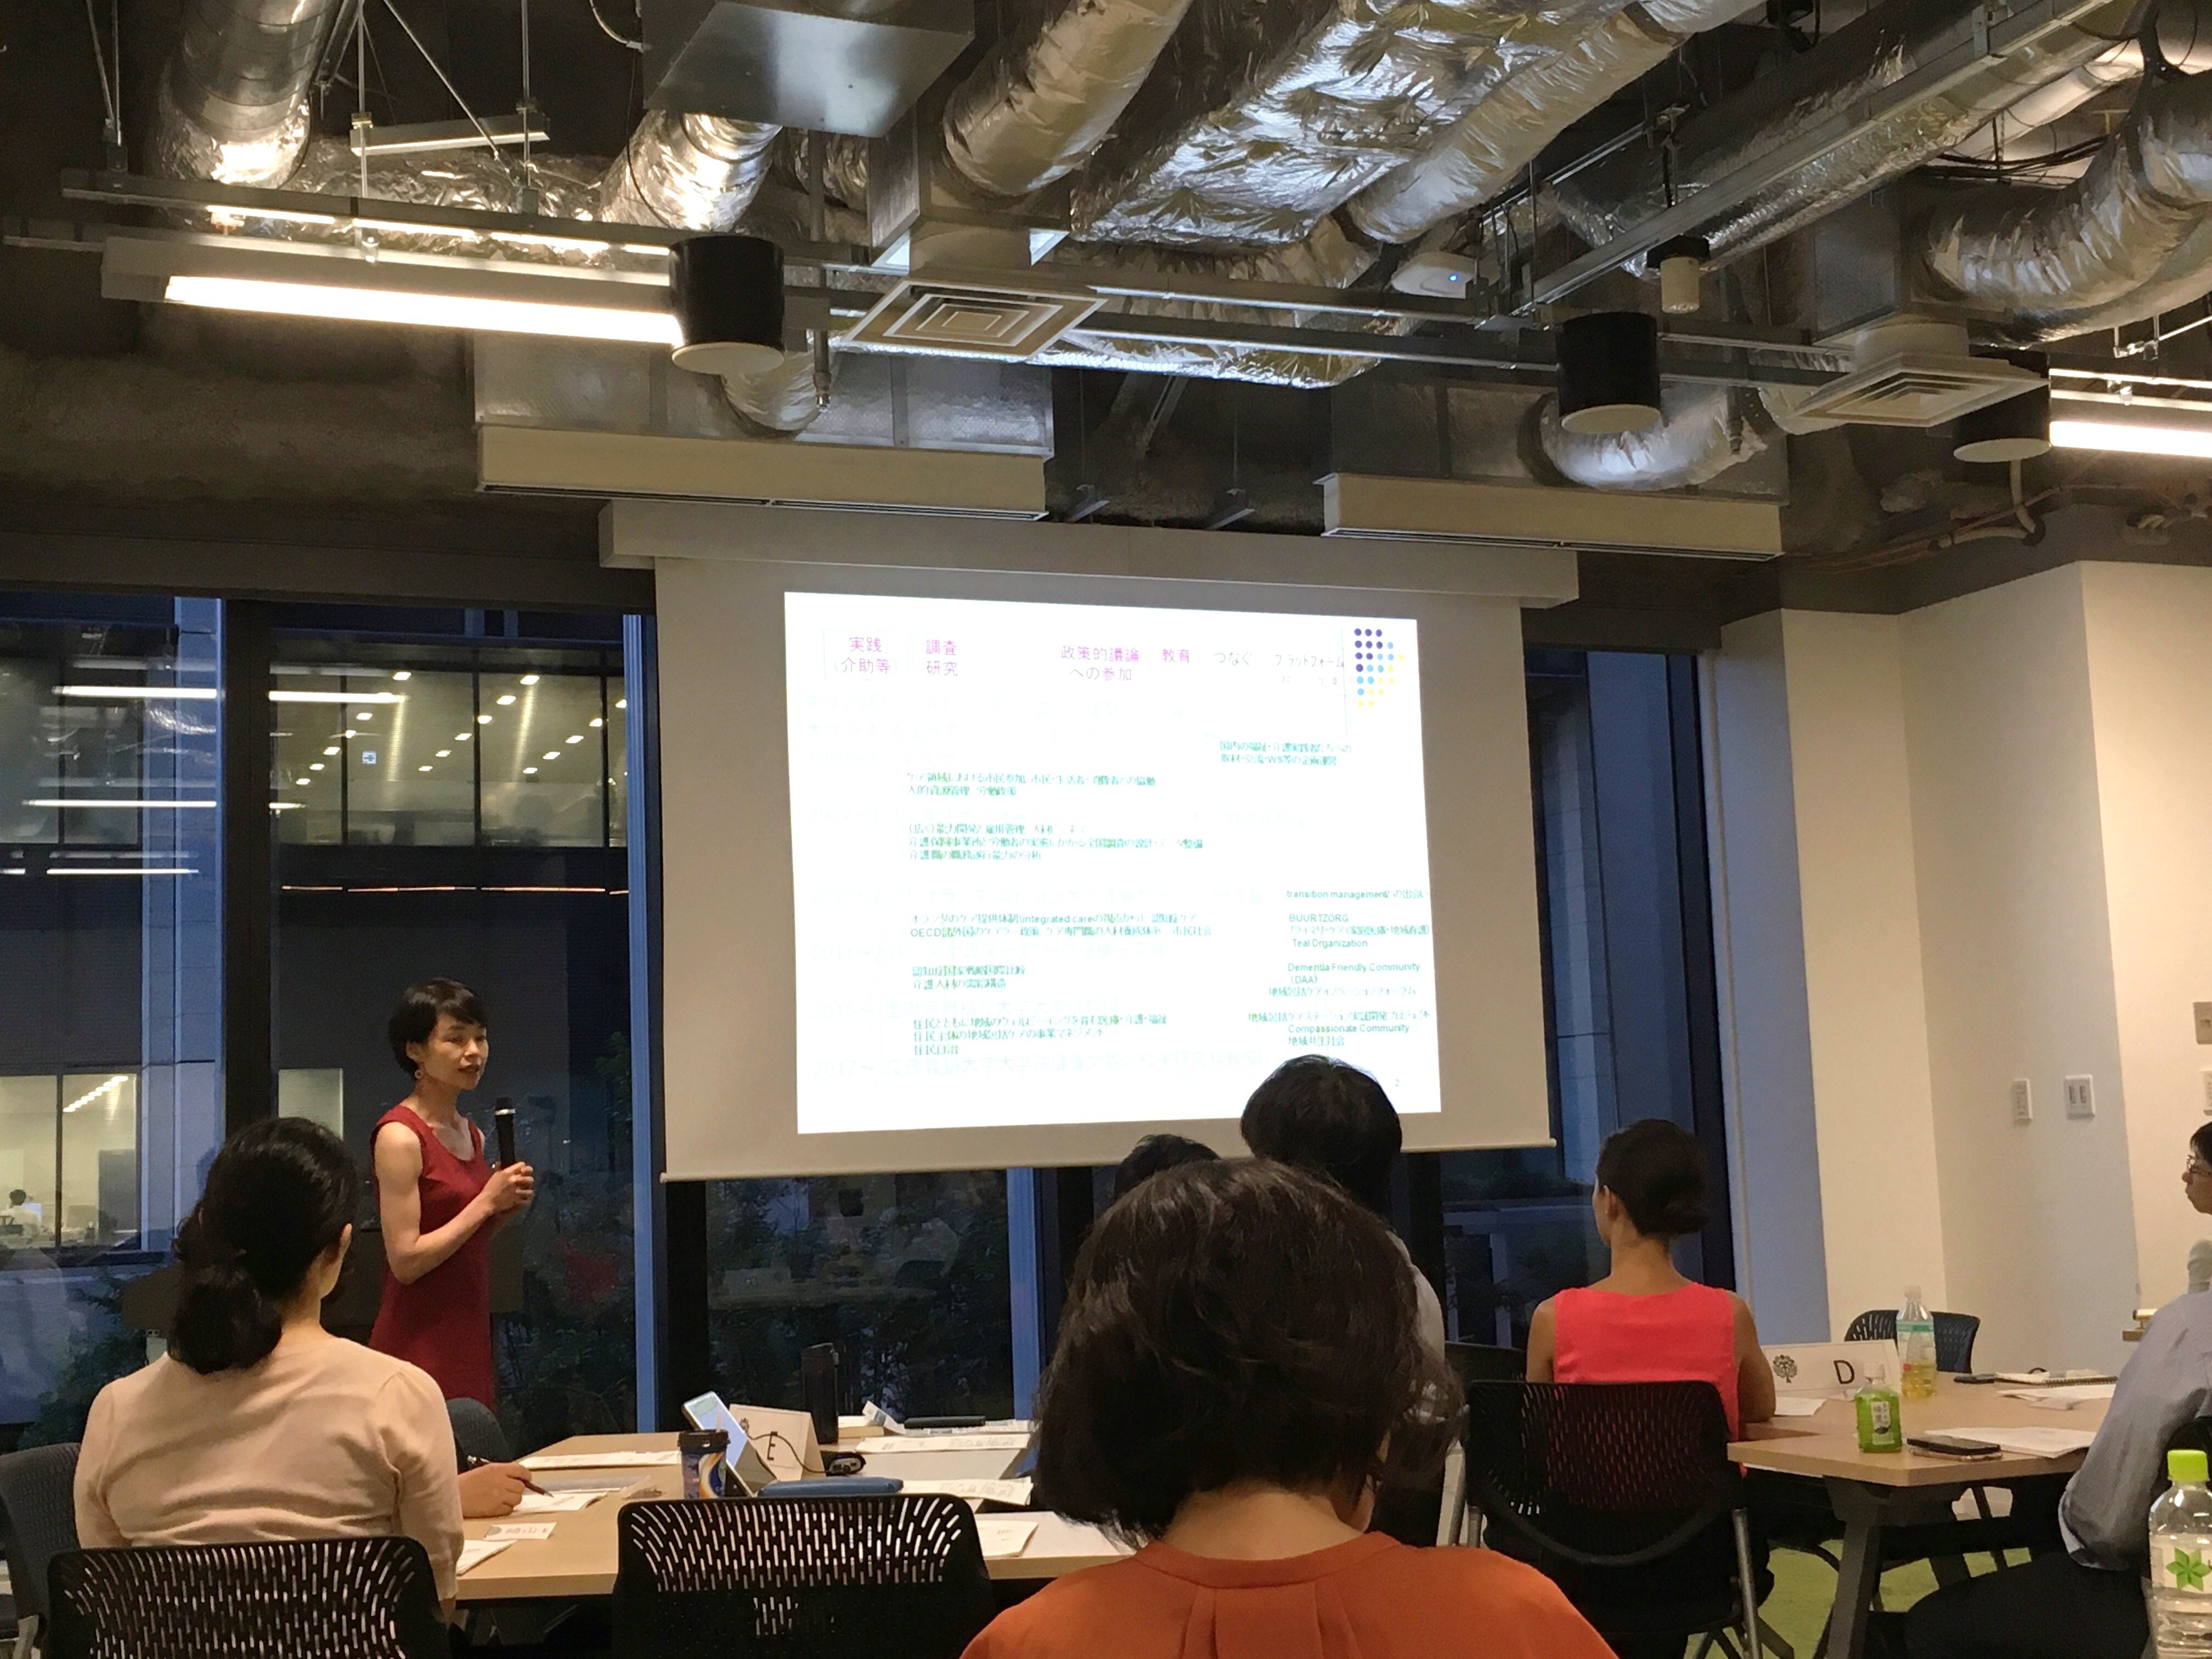 [Event Report] Health Policy Academy, Health Policy 101: Session 5: Community Medicine (August 1, 2018)